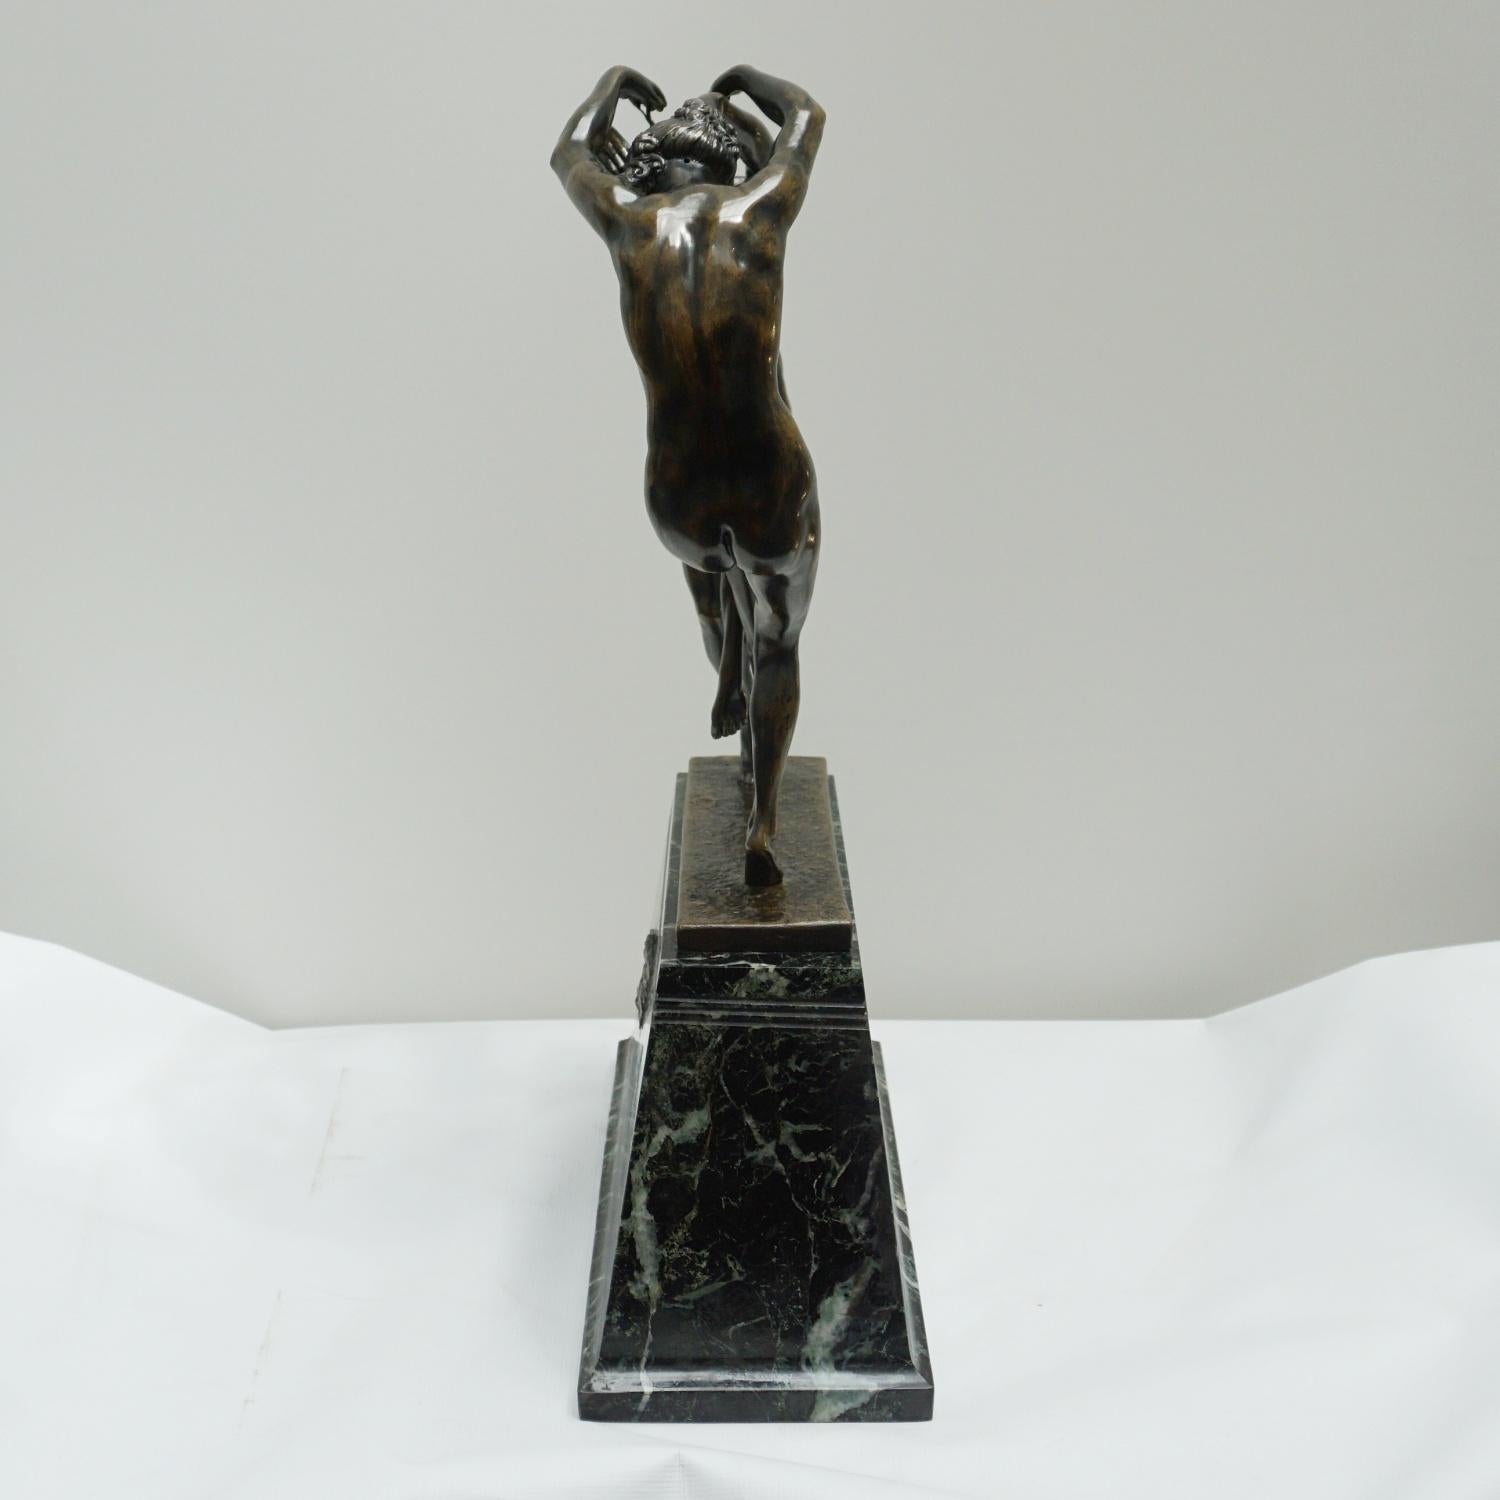 Original Art Deco Bronze and Marble Sculpture, French, C1920 For Sale 8